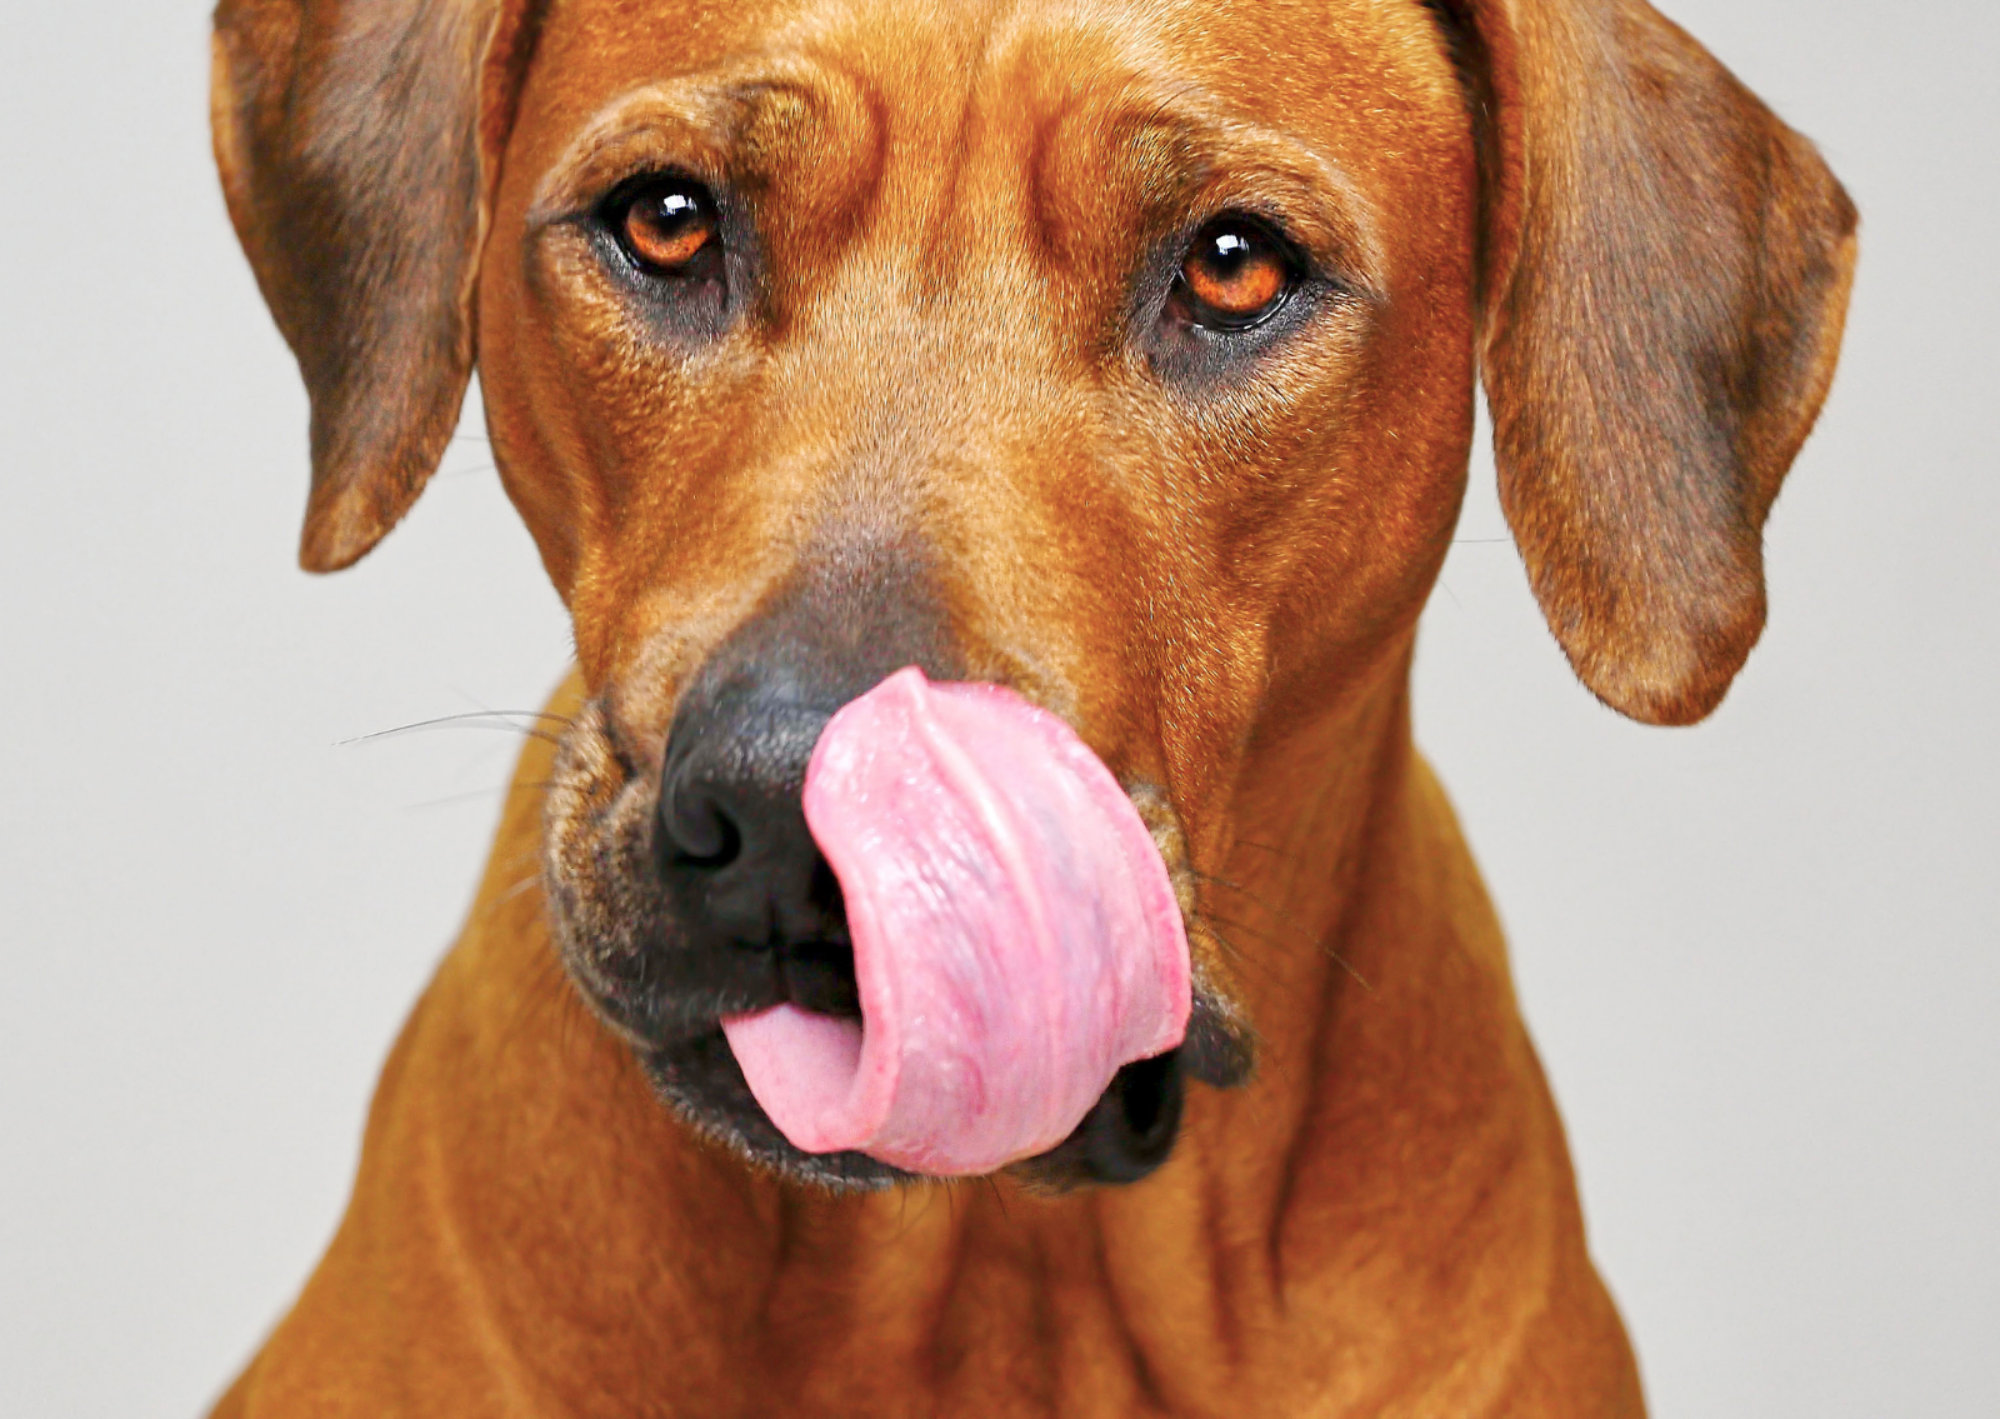 Coprophagia in dogs - Does your dog eat Poop?